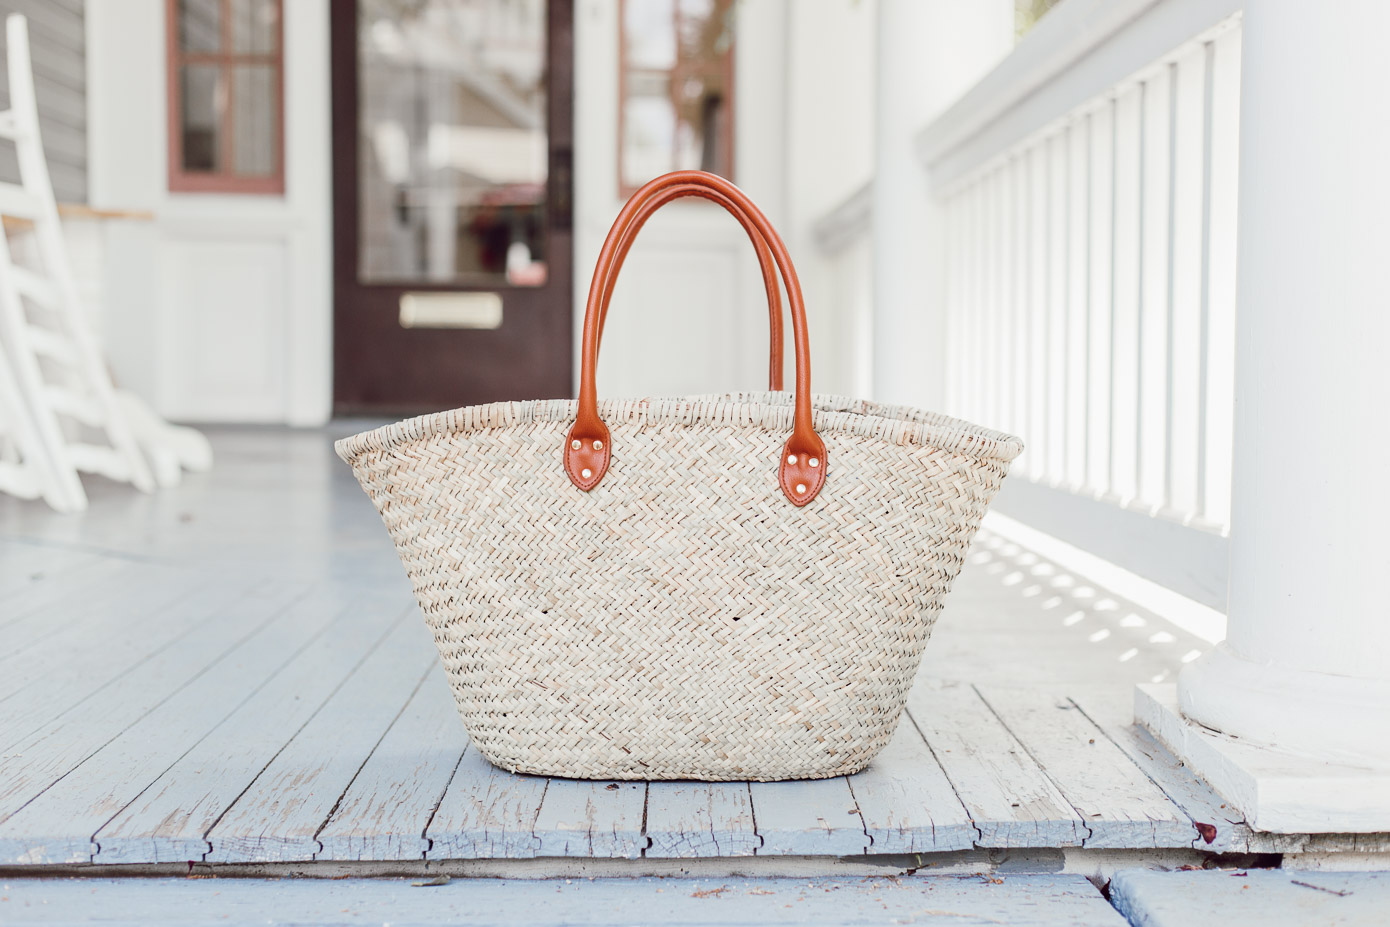 Summer 2018 Bucket List | The Perfect Straw Tote under $50 | Louella Reese Life & Style Blog